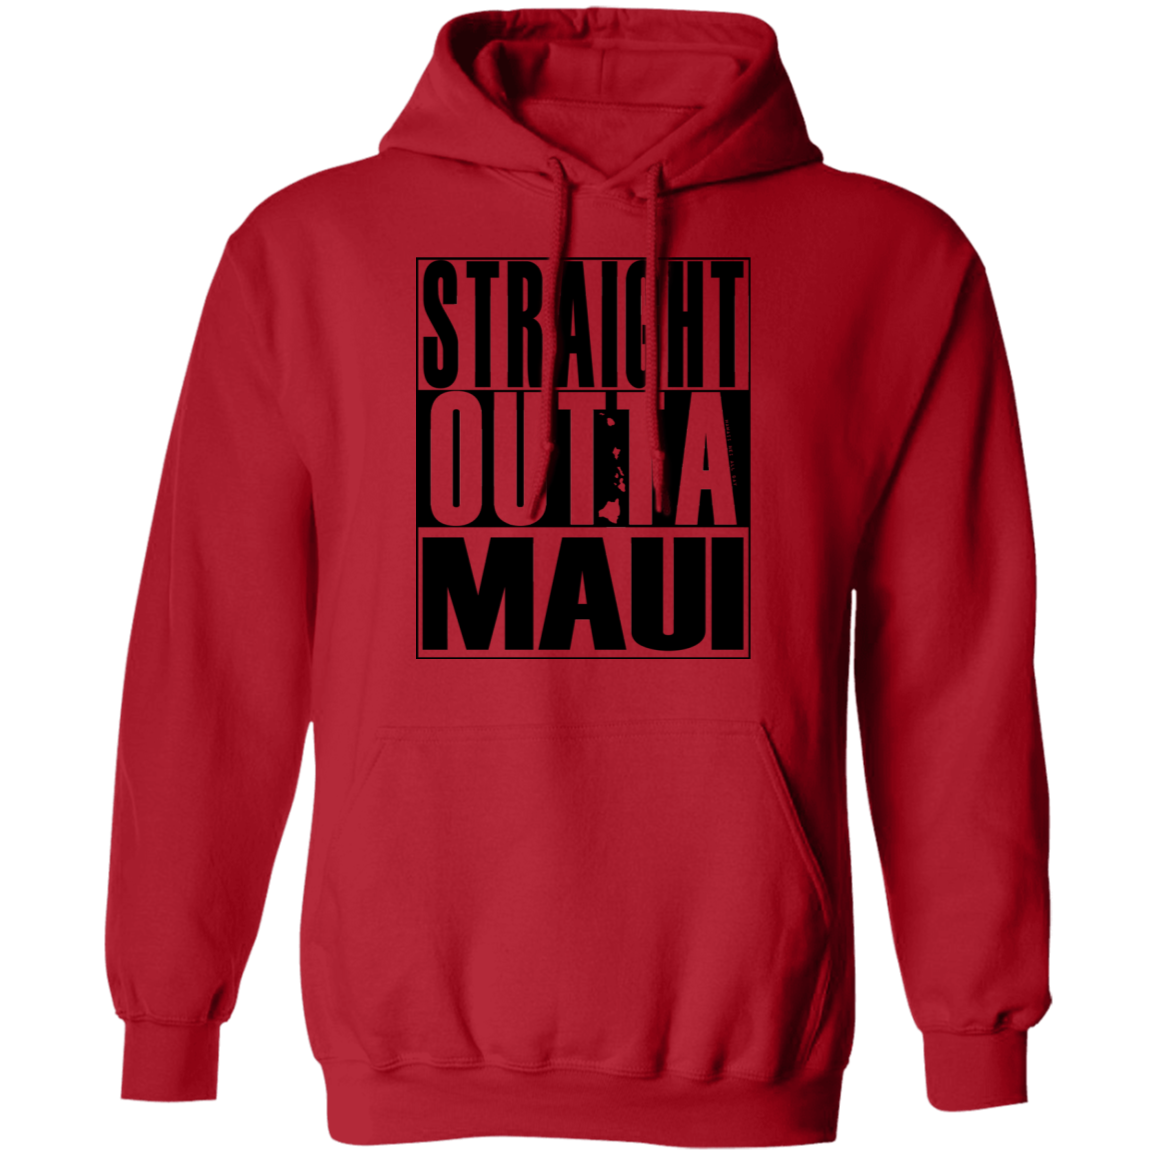 Straight Outta Maui(black ink) Pullover Hoodie